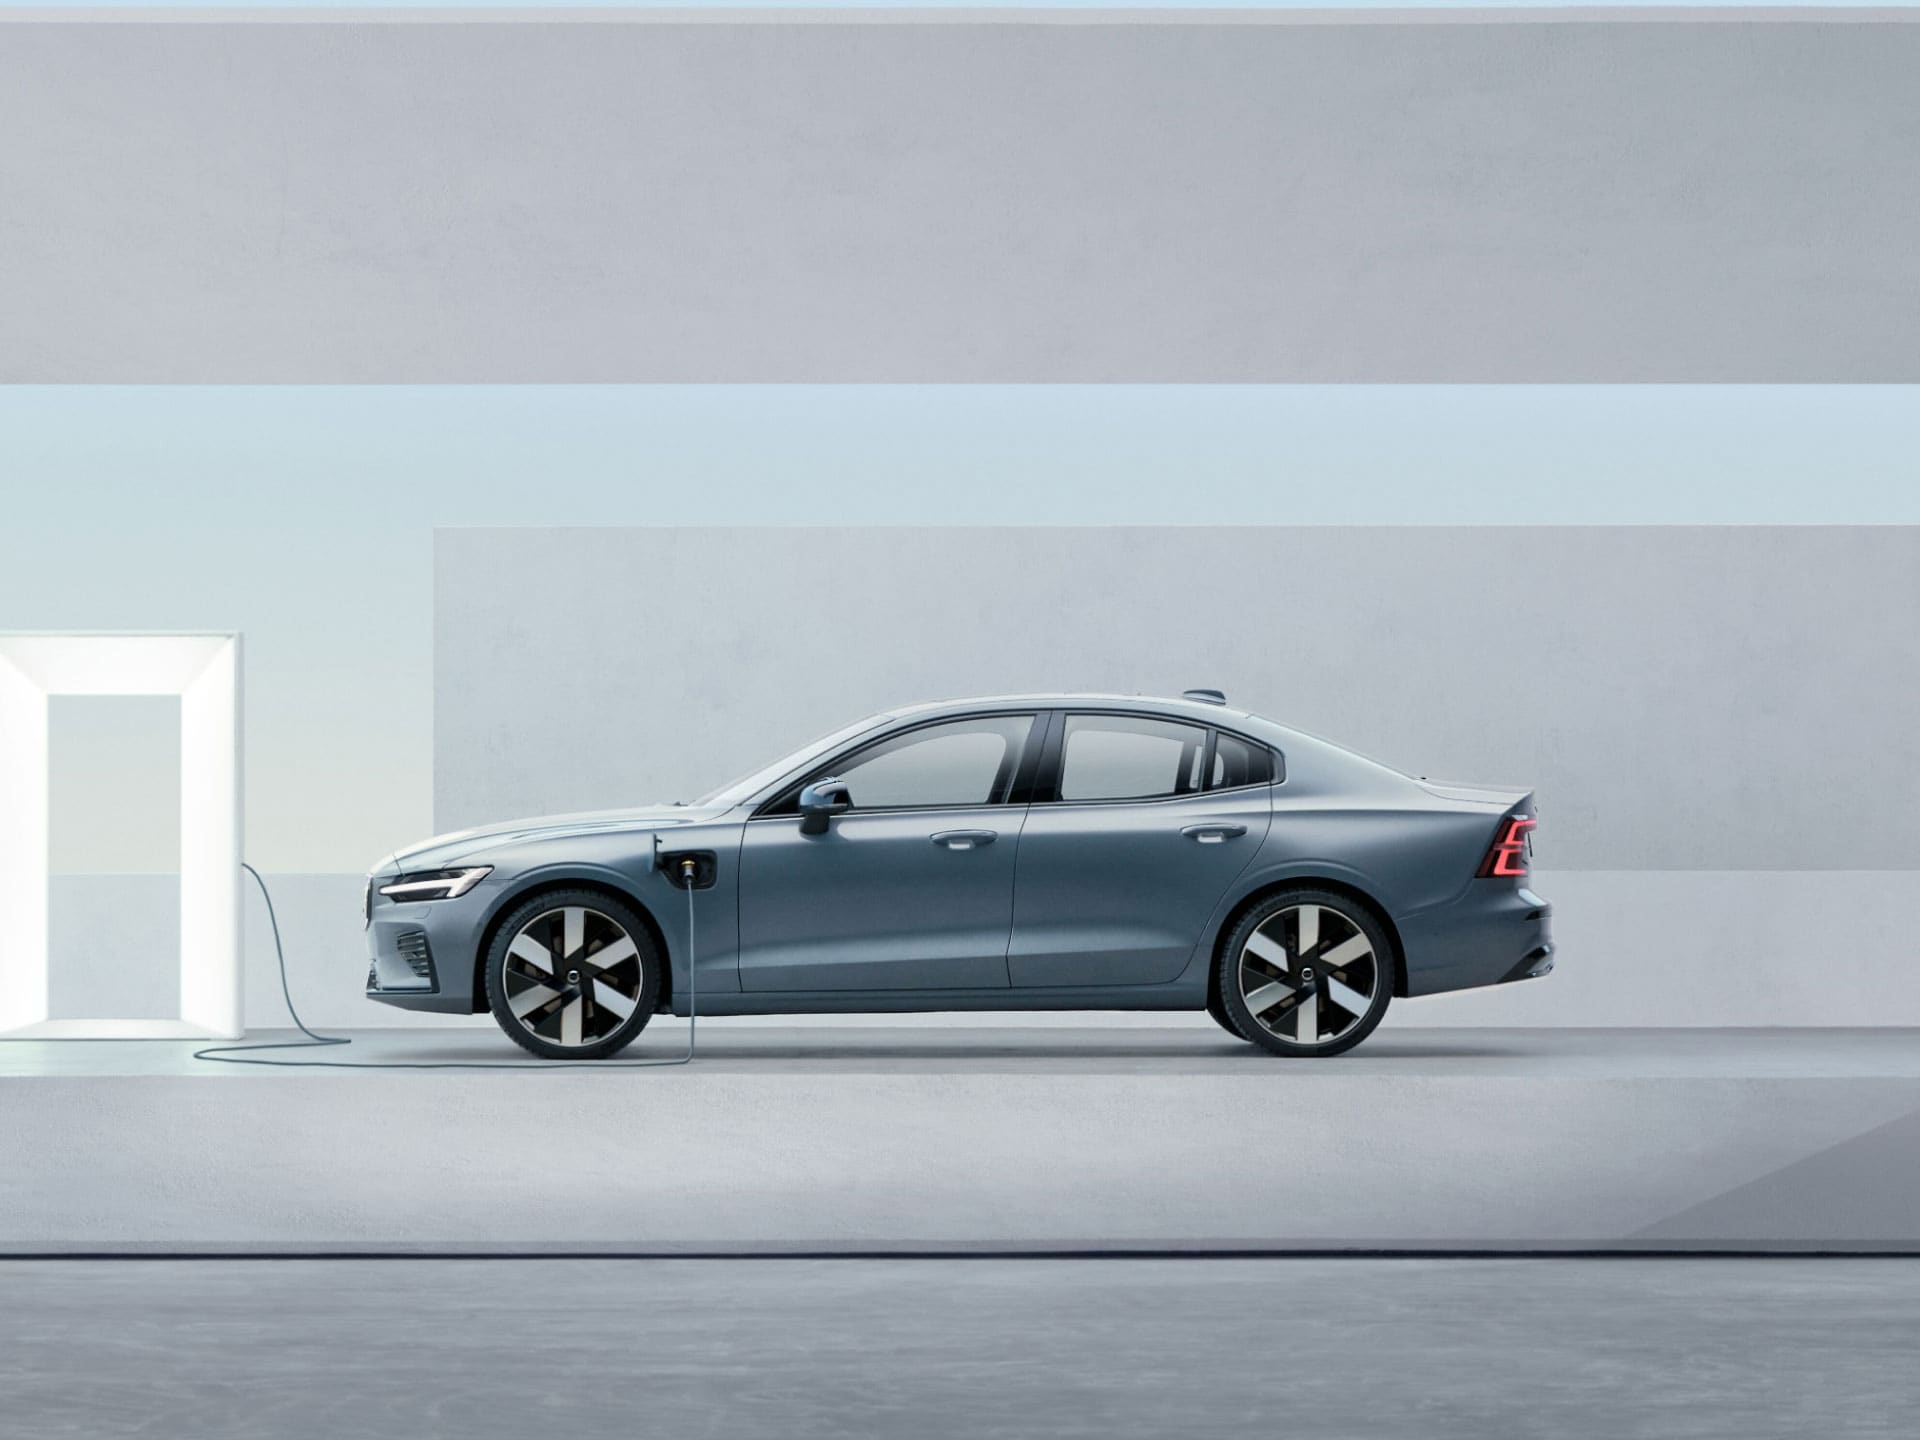 A wide-angle view of the side of a Volvo plug-in hybrid sedan car plugged into a charger.